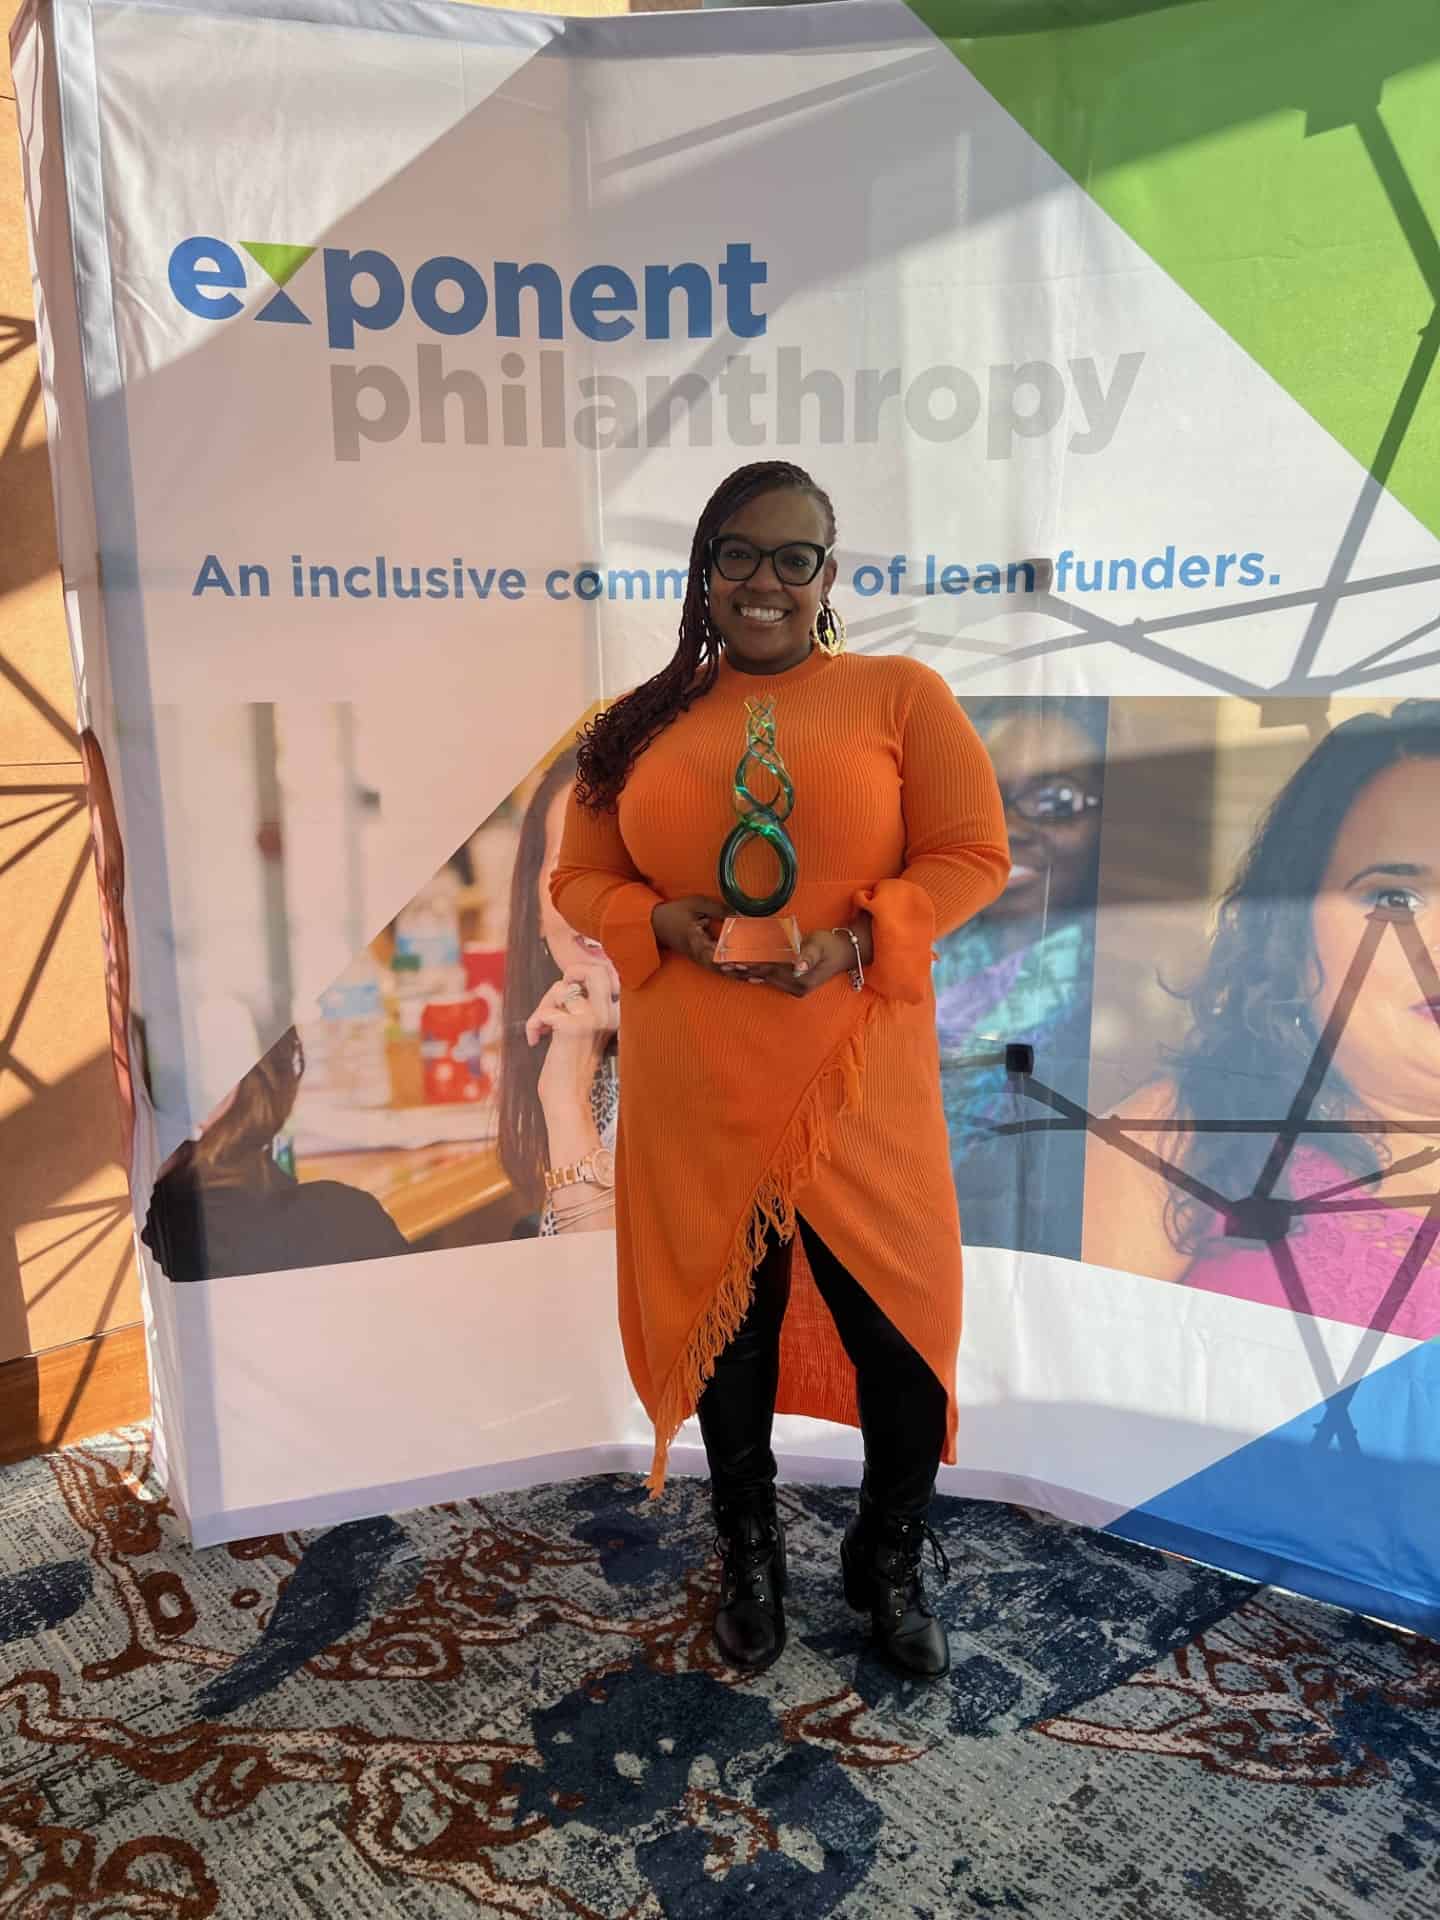 Gifford Executive Director Sheena Solomon smiles and poses with her award, She is wearing a tight orange dress and braided hair.